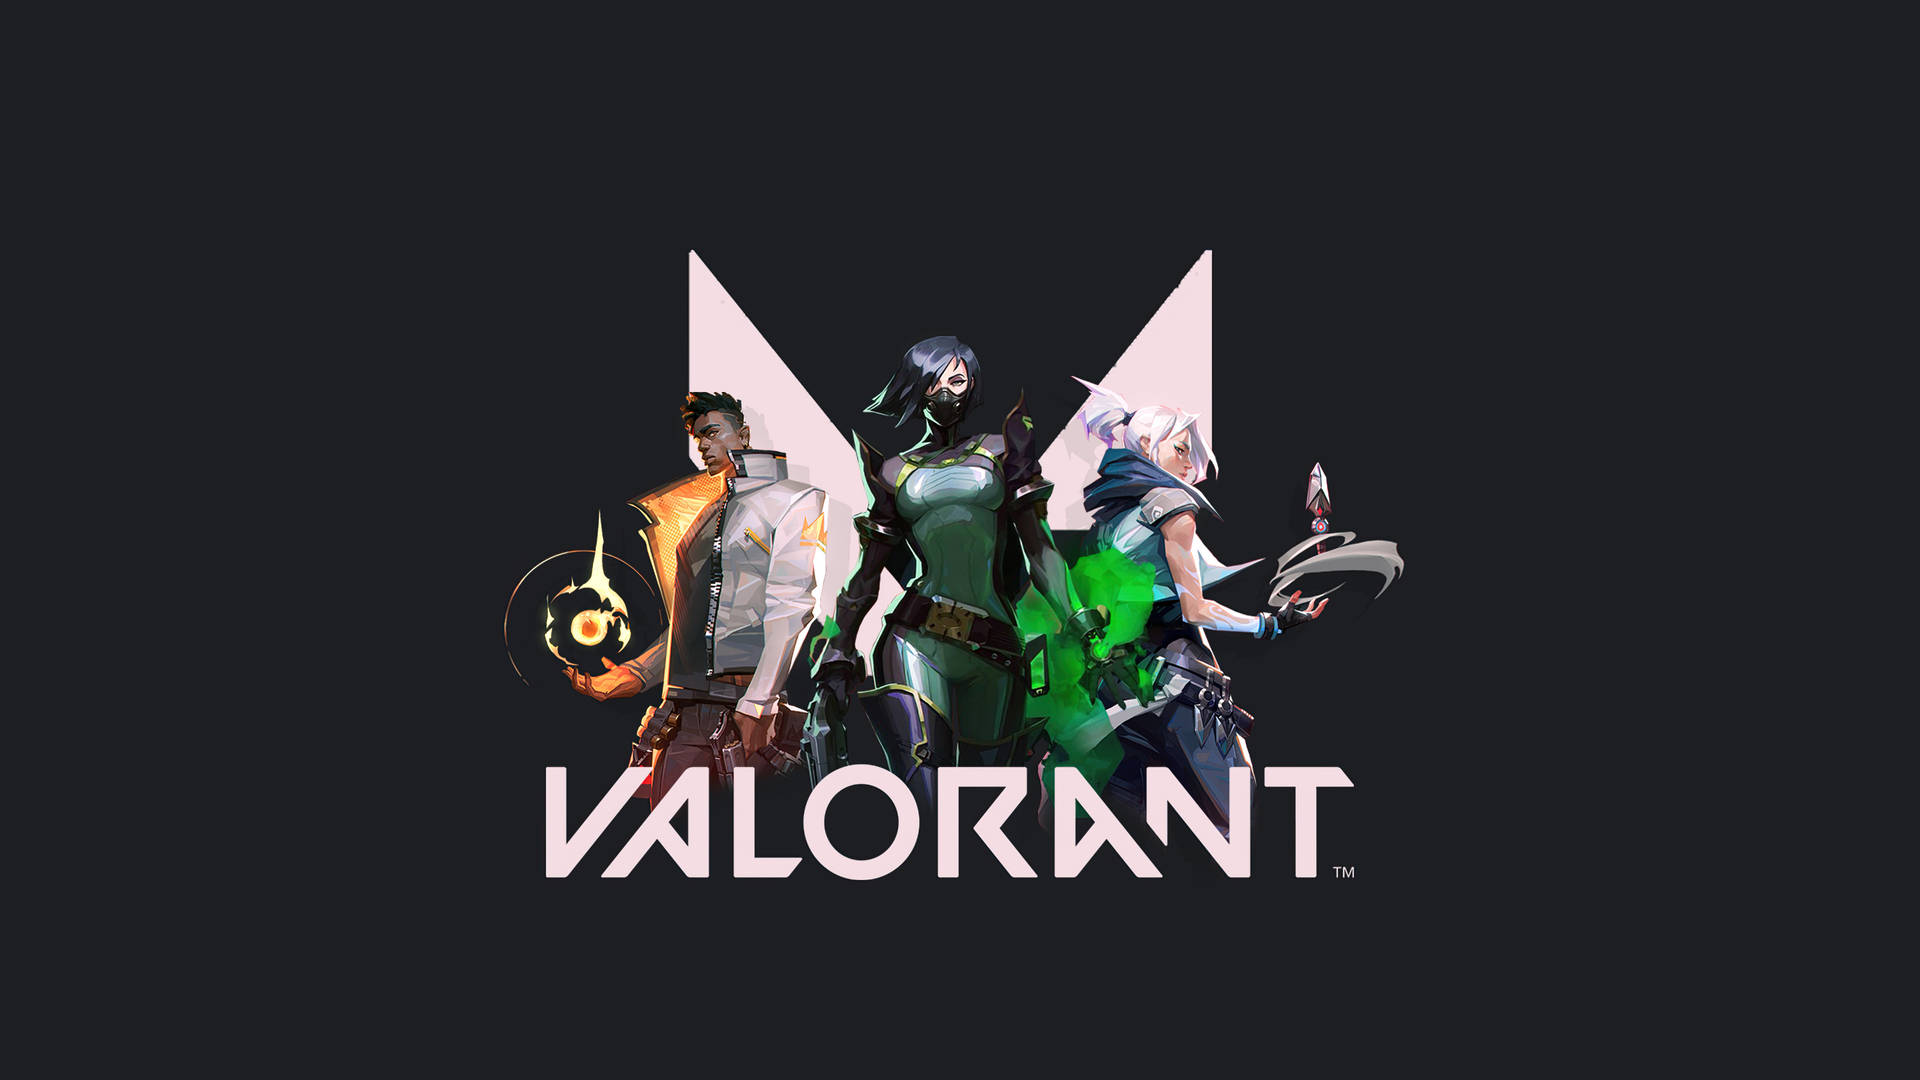 Combining fire and poison, Phoenix and Viper are powerful Agents in the Valorant universe. Wallpaper